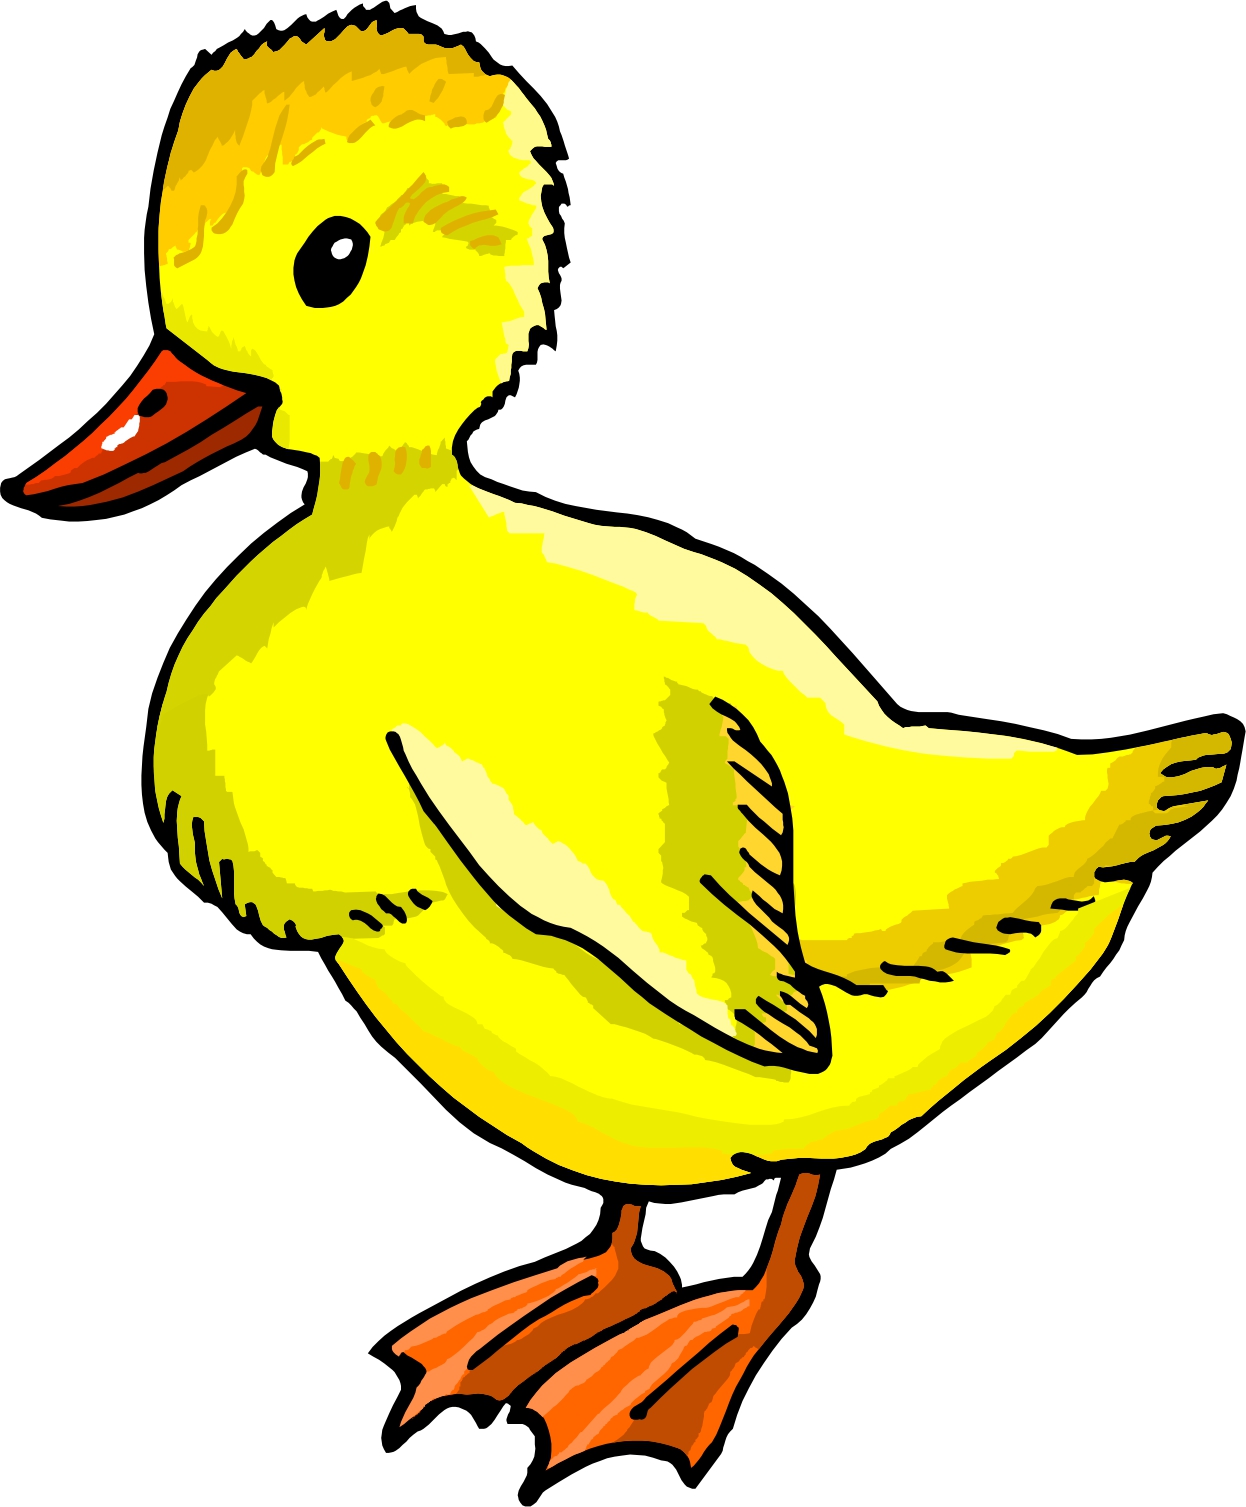 Drawing of a yellow duckling free image download